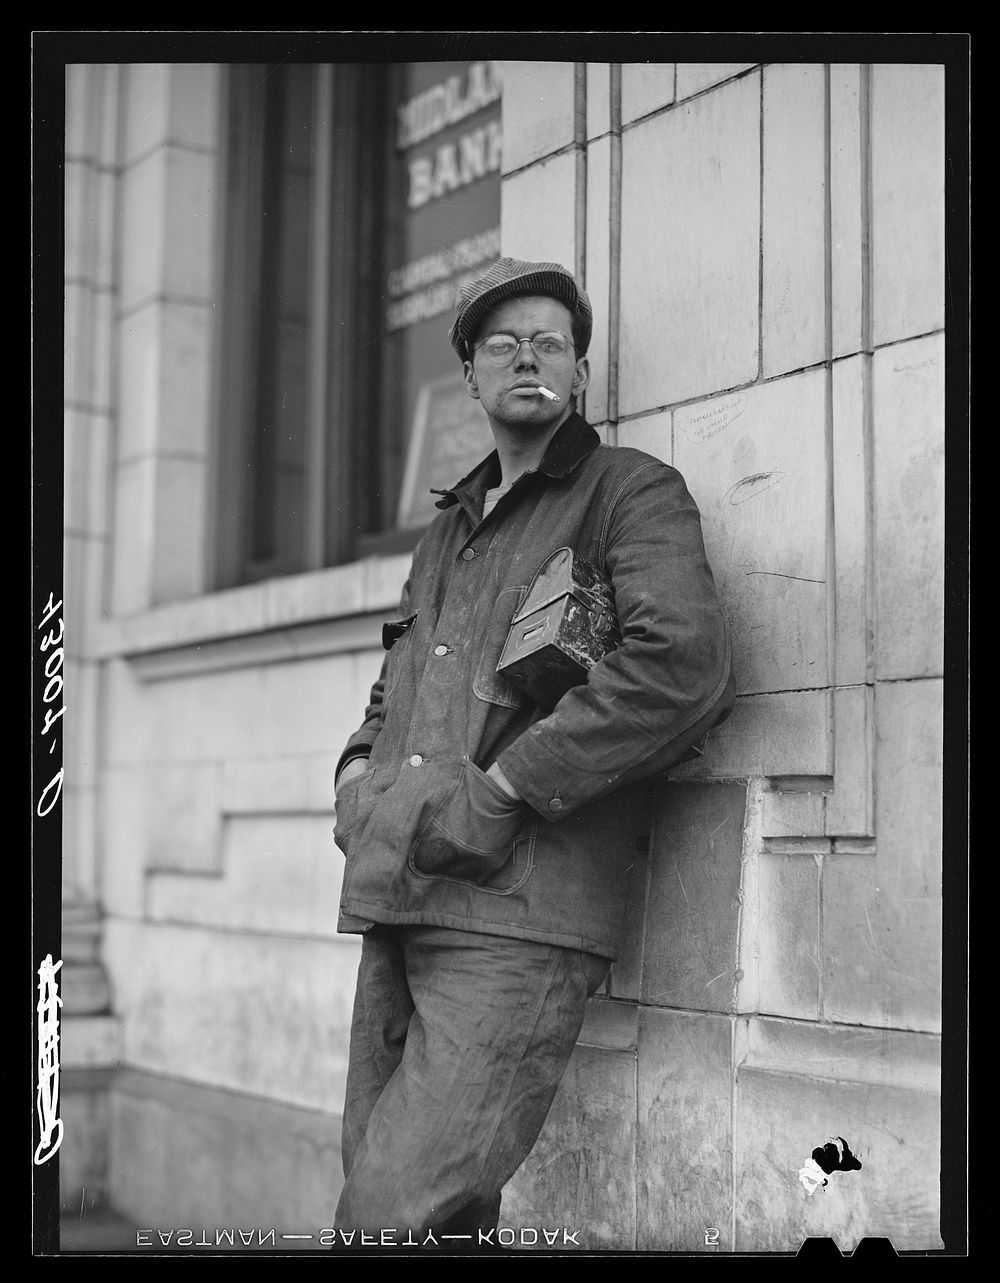 Steelworker waiting for a bus Midland, Pennsylvania. Sourced from the Library of Congress.